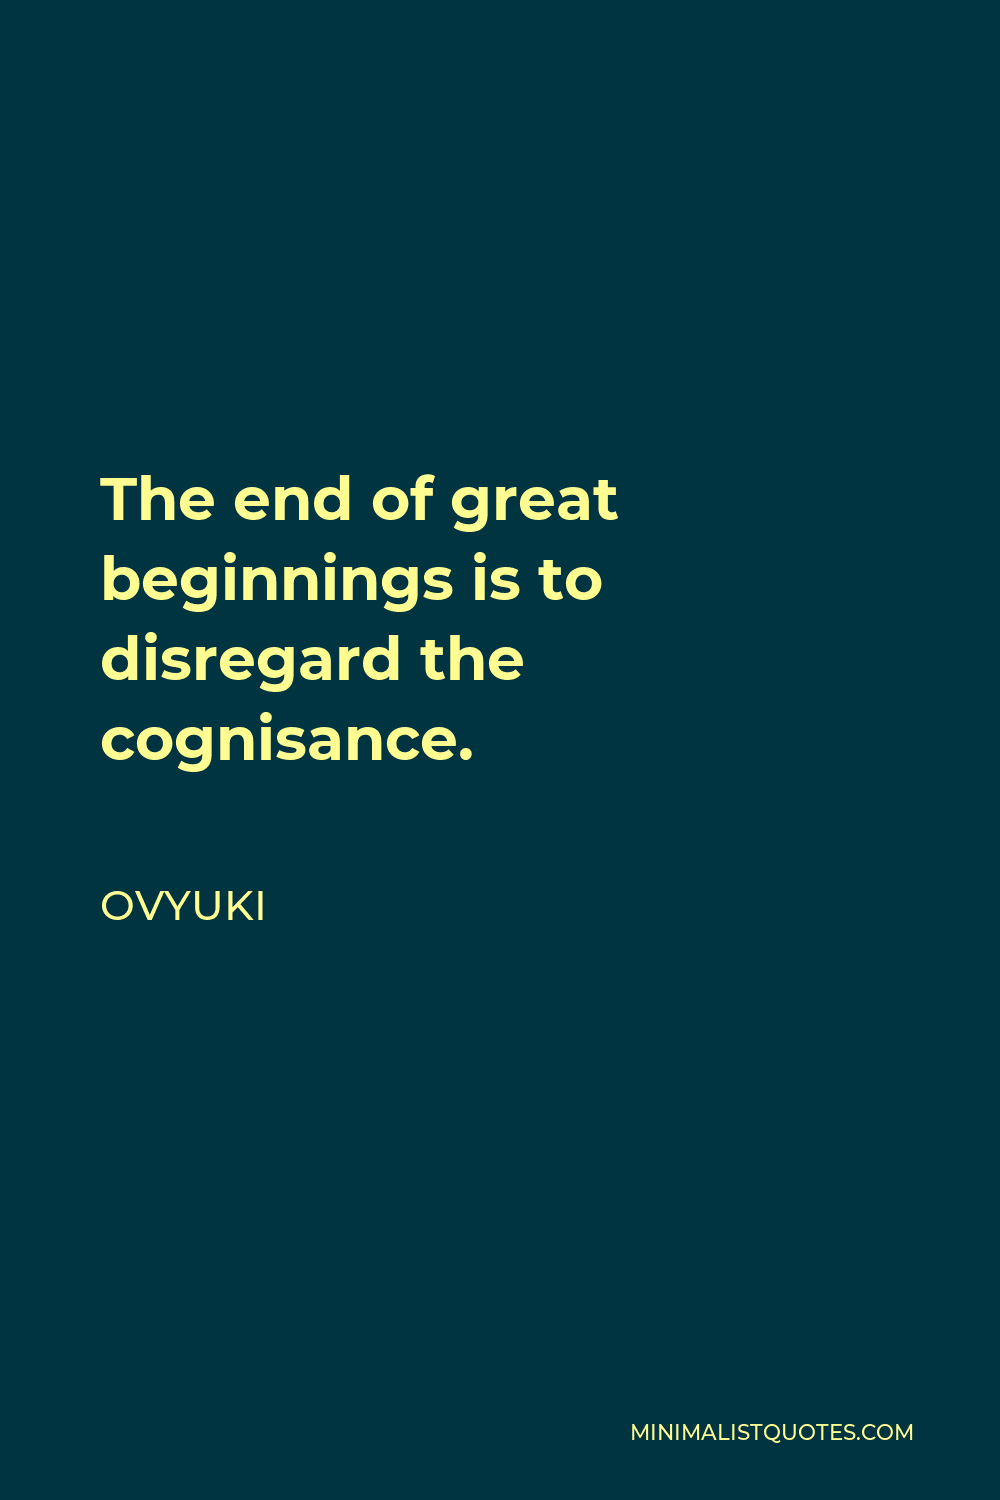 Ovyuki Quote - The end of great beginnings is to disregard the cognisance.